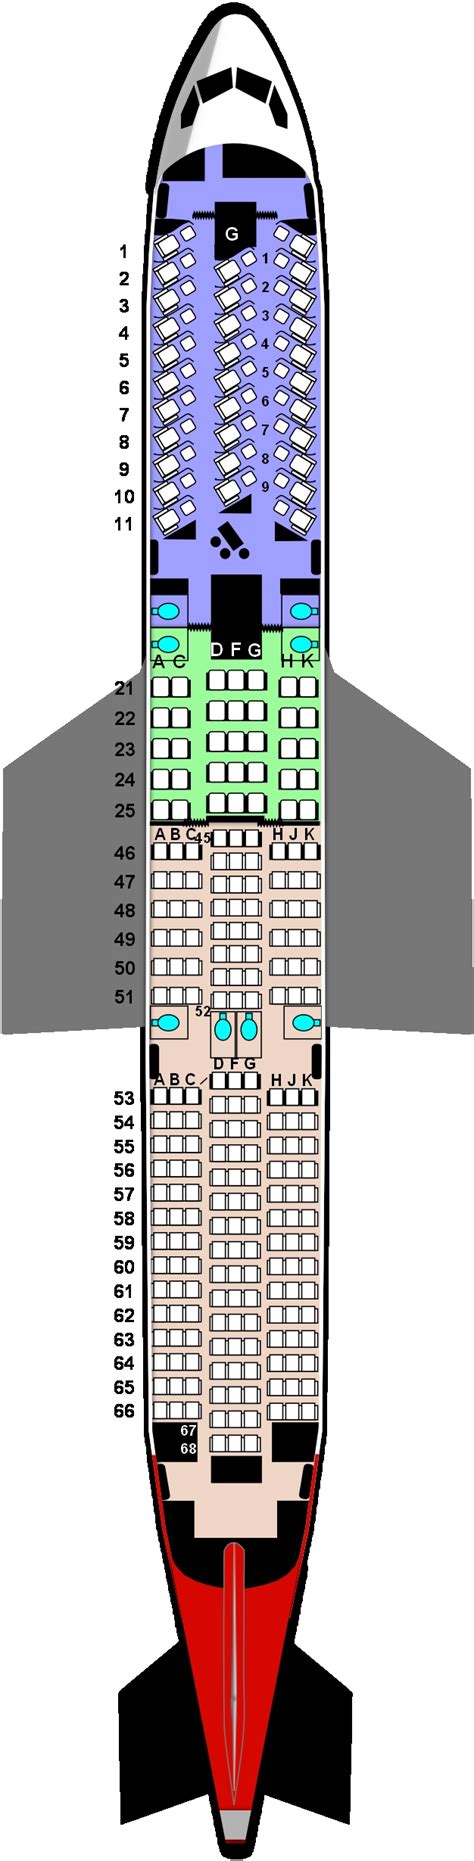 Challenges of implementing MAP Boeing 787 9 Seat Map